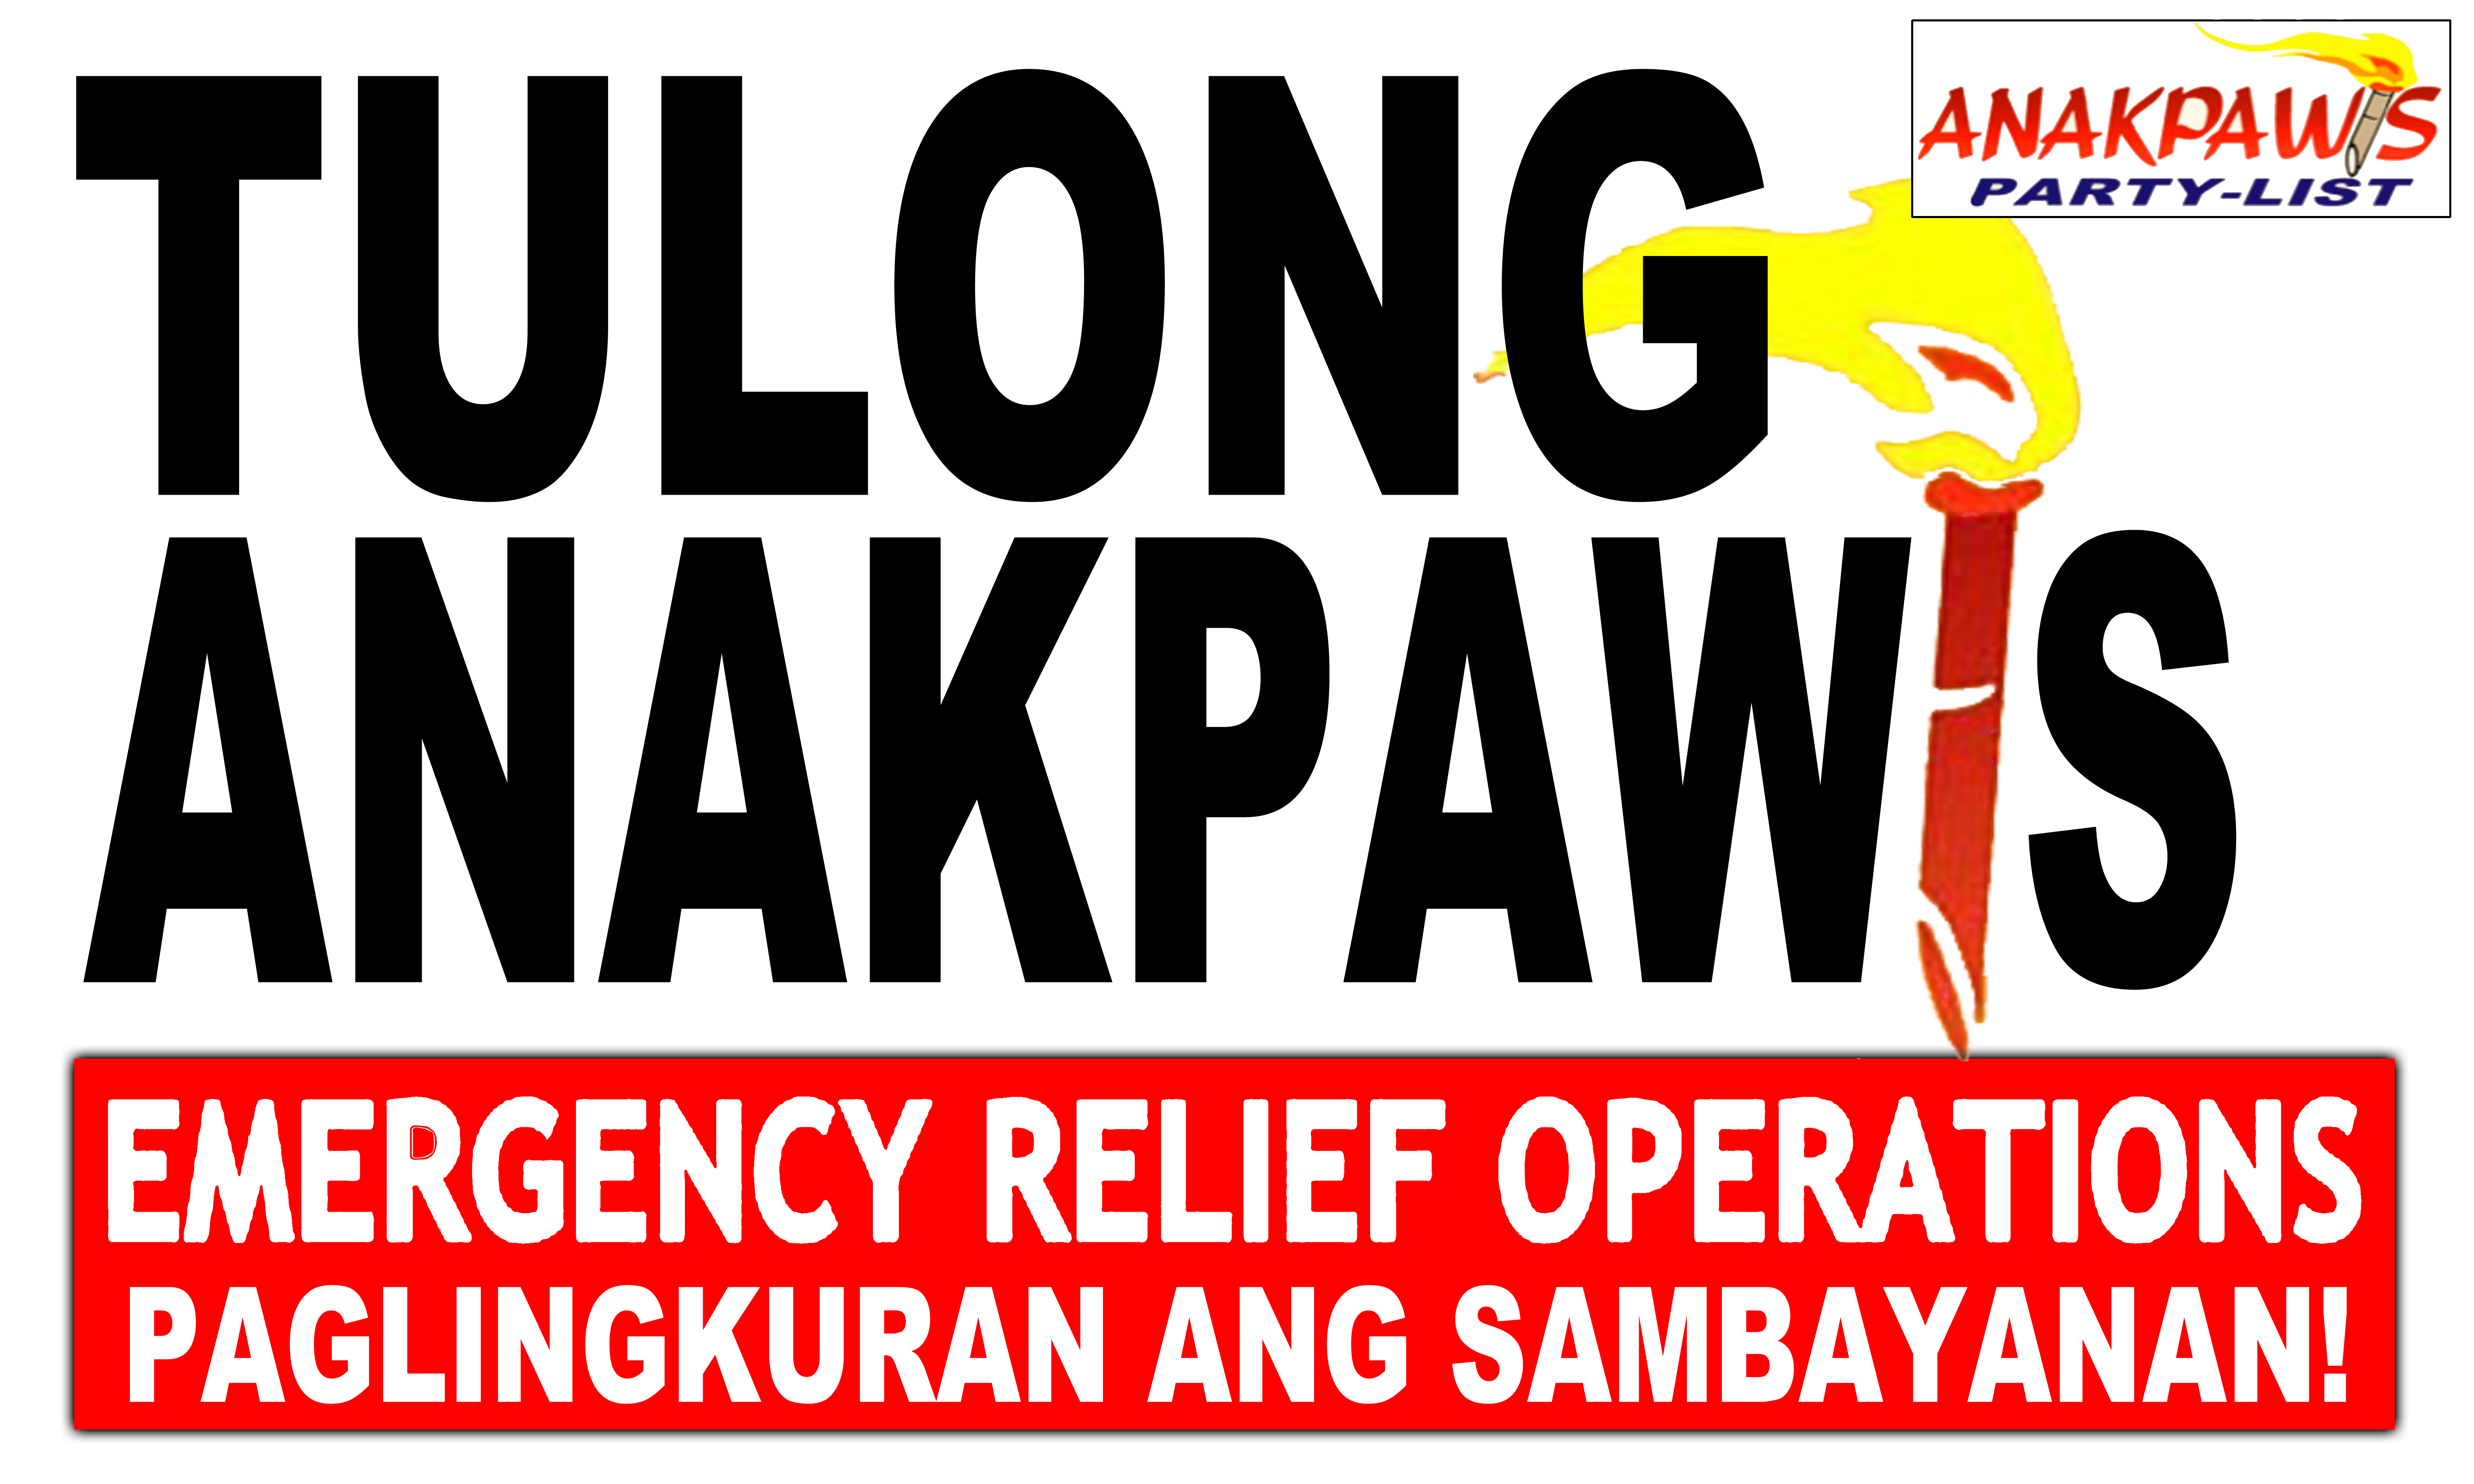 campaign poster for relief and rehabilitation campaign of Sagip Kanayunan and tulong Anakpawis 